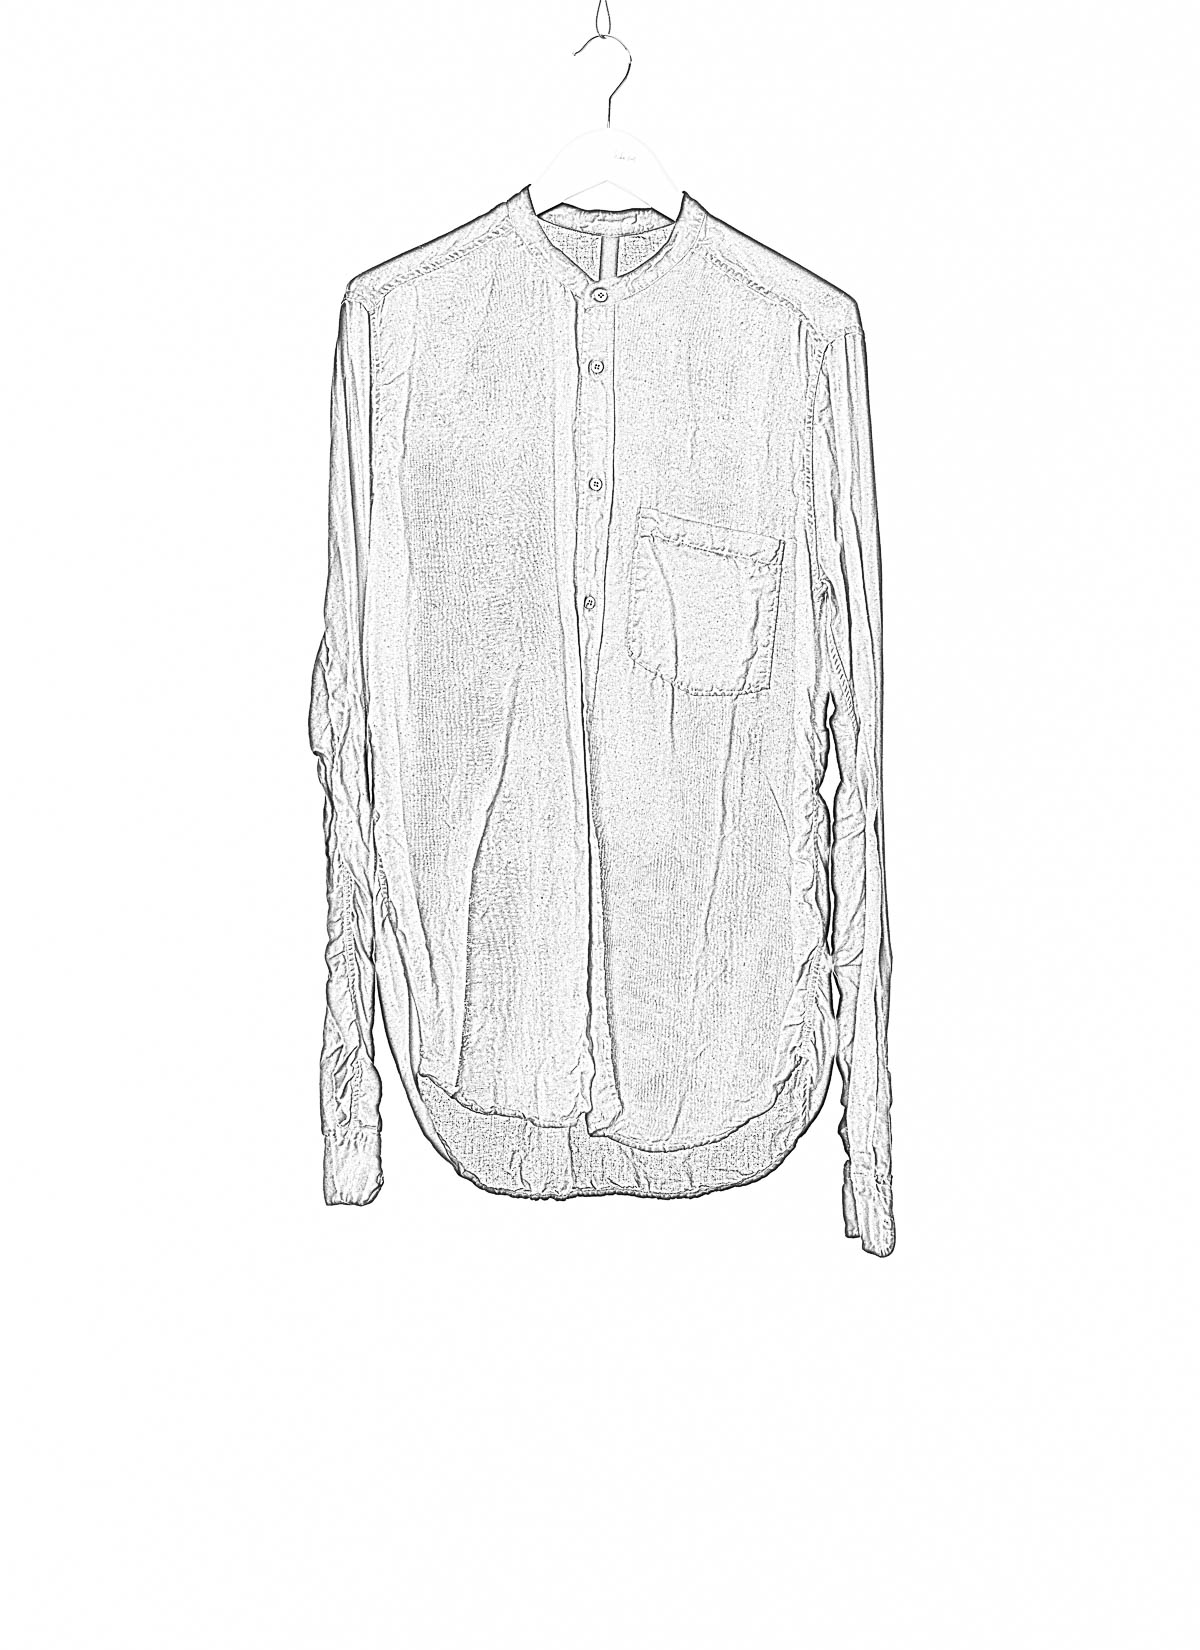 Fashion PLM Software | Retail PLM Software | Basyx | Shirt sketch, Blouse  drawing, Sewing material